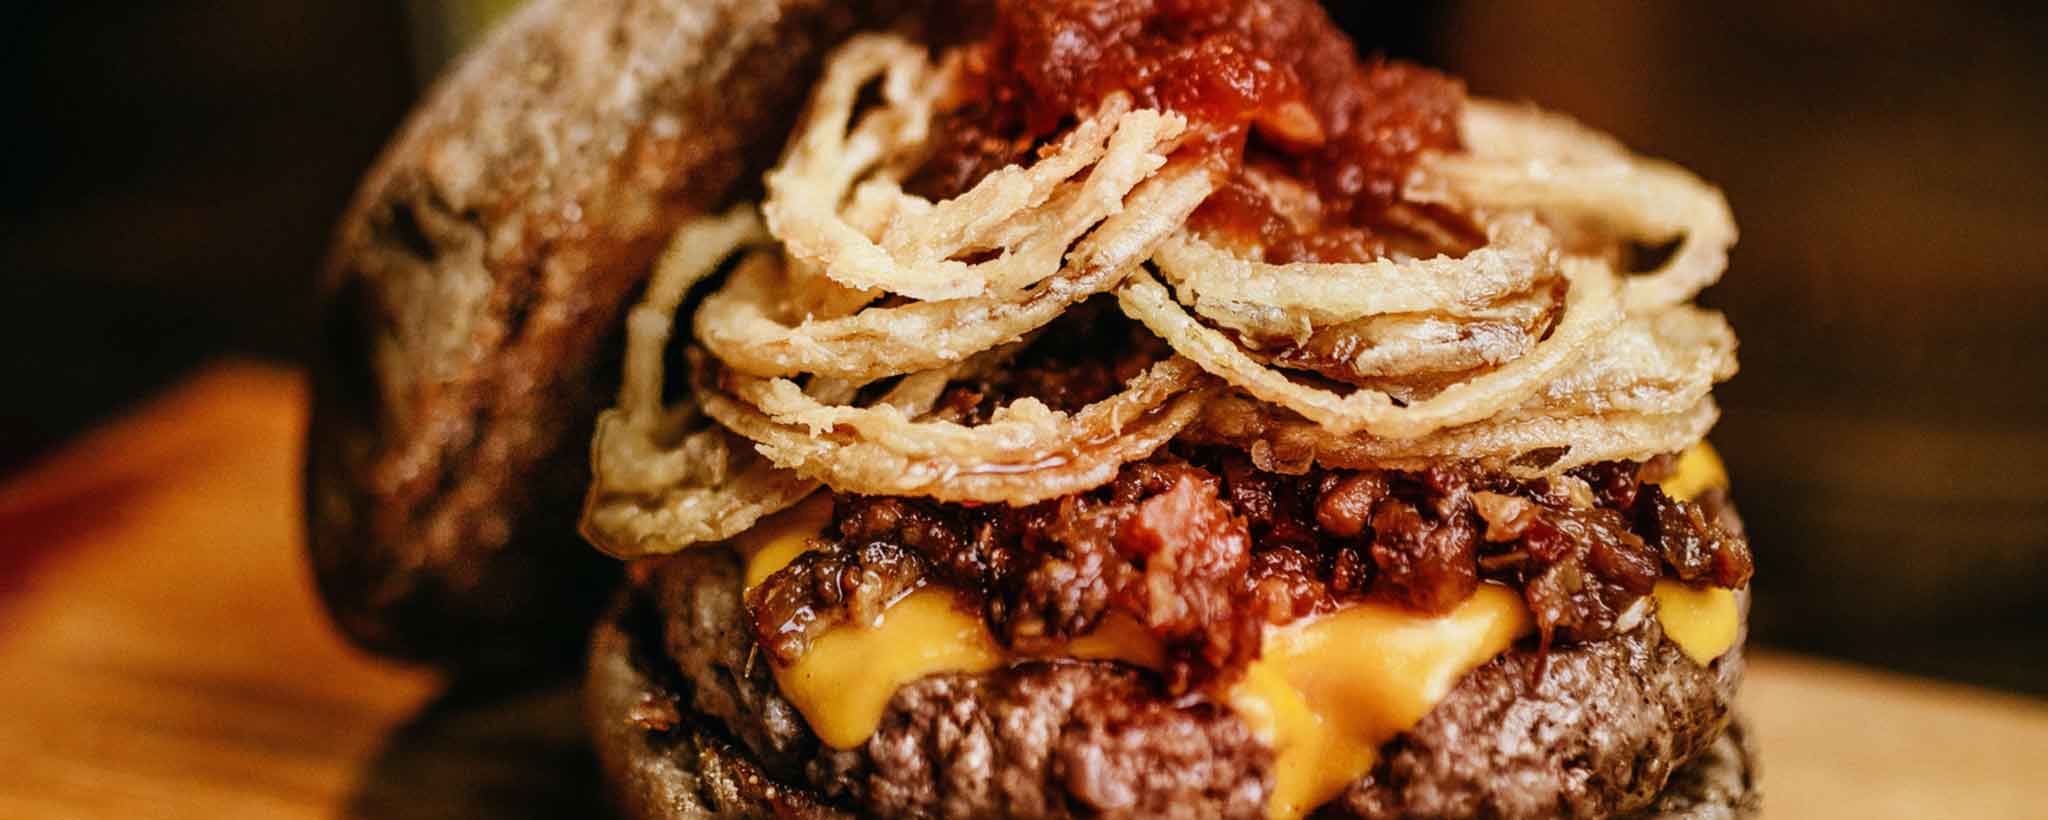 'Beef burger with chili and fried onions'